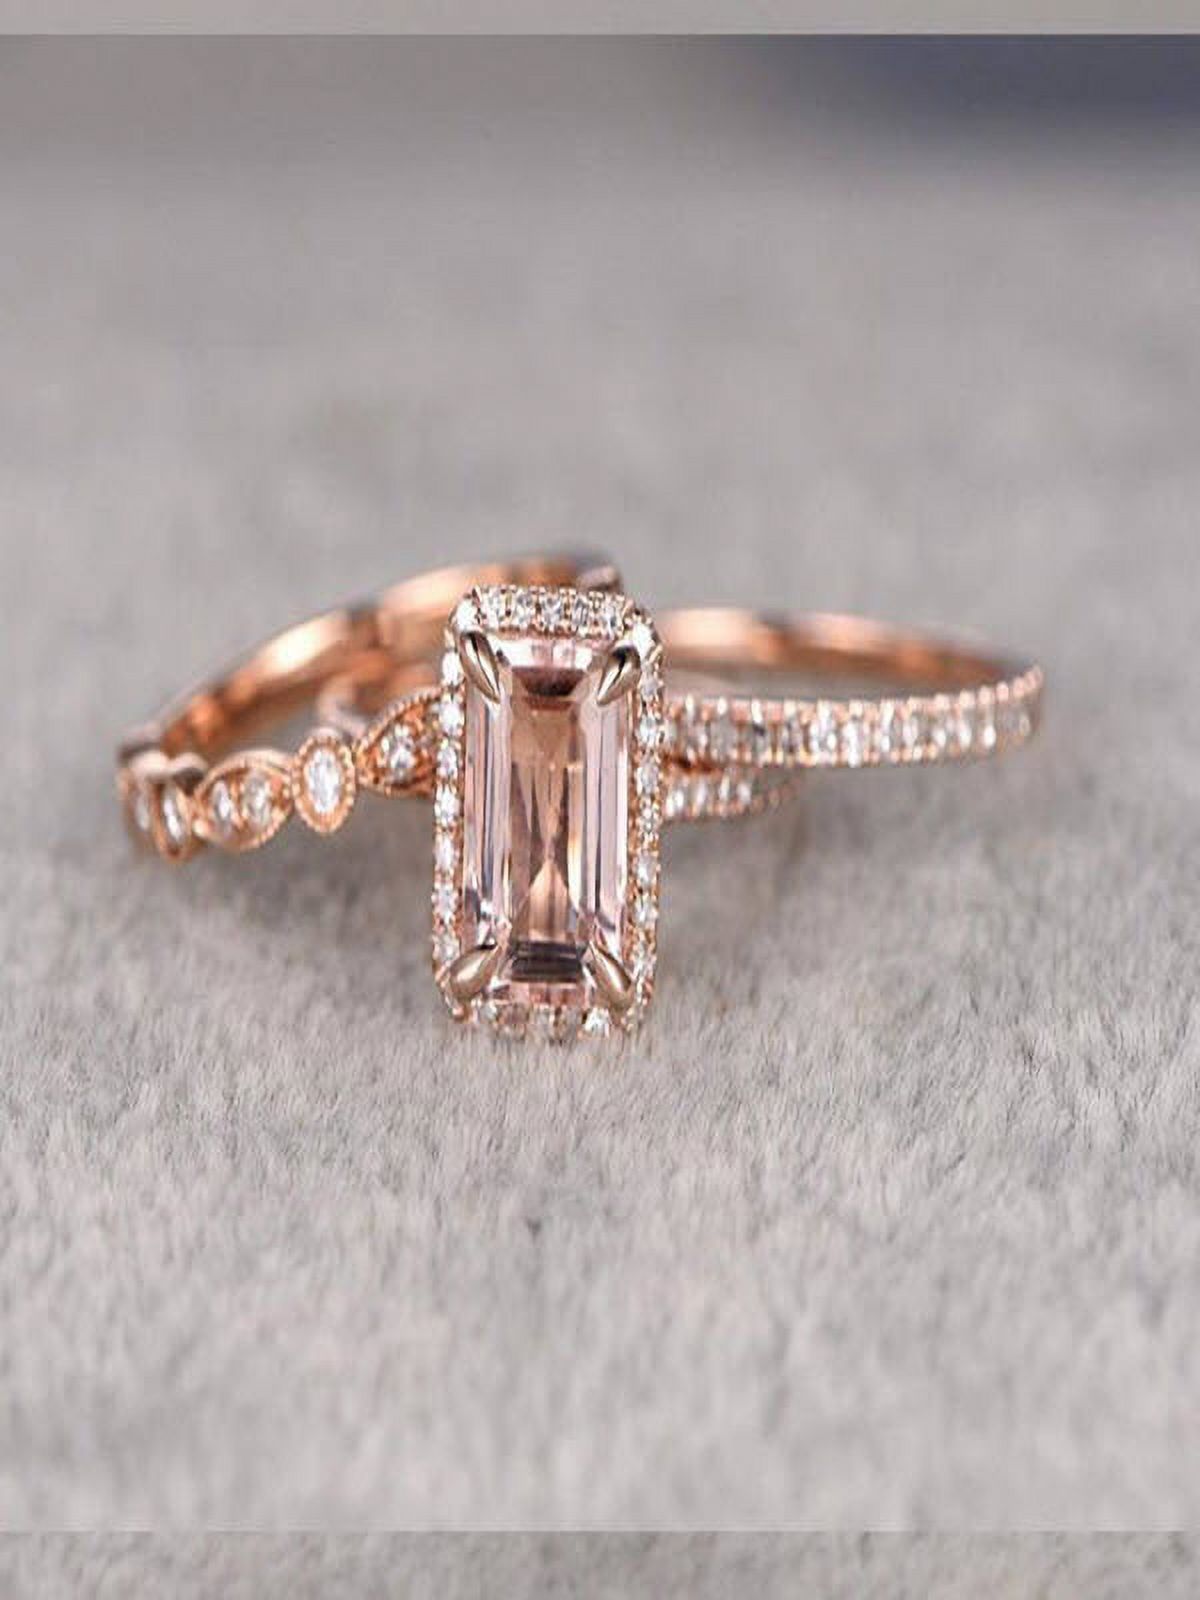 Limited Time Sale 2 Carat Morganite And Diamond Moissanite Trio Ring Set In 10K Rose Gold With One Engagement Ring And 2 Wedding Bands - image 1 of 2